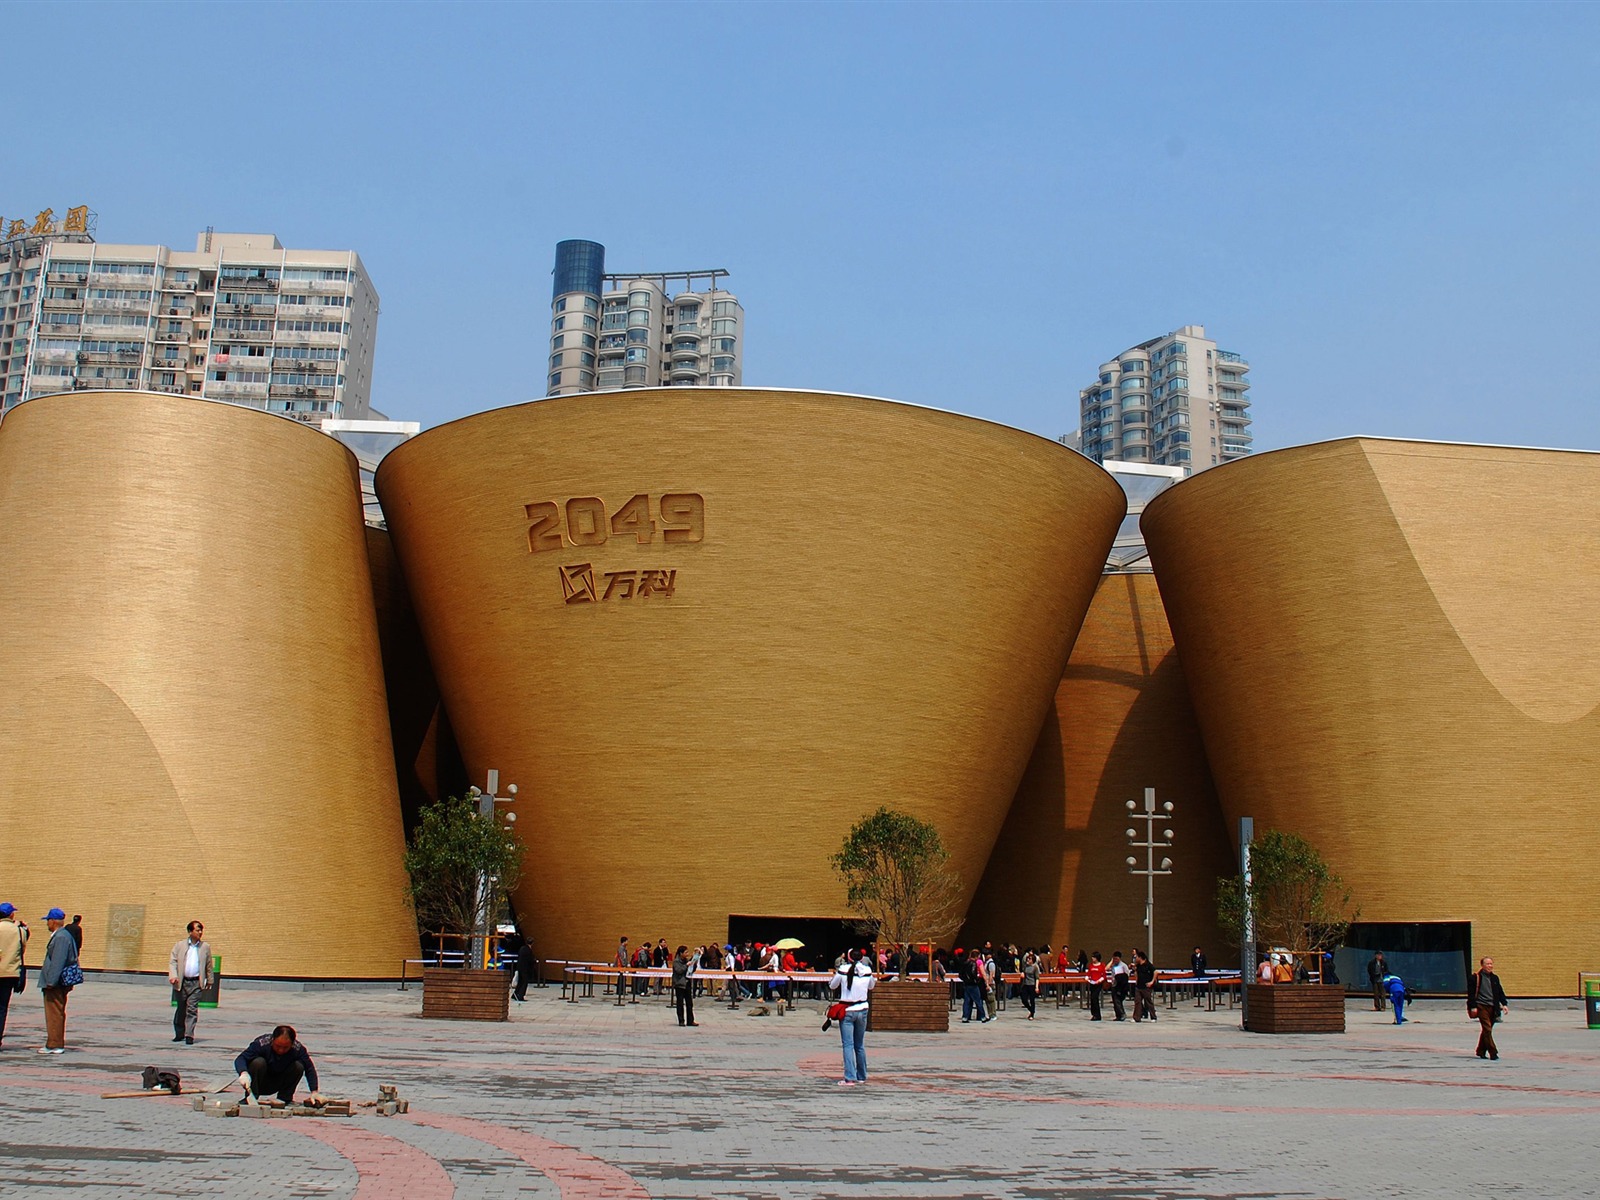 Commissioning of the 2010 Shanghai World Expo (studious works) #17 - 1600x1200